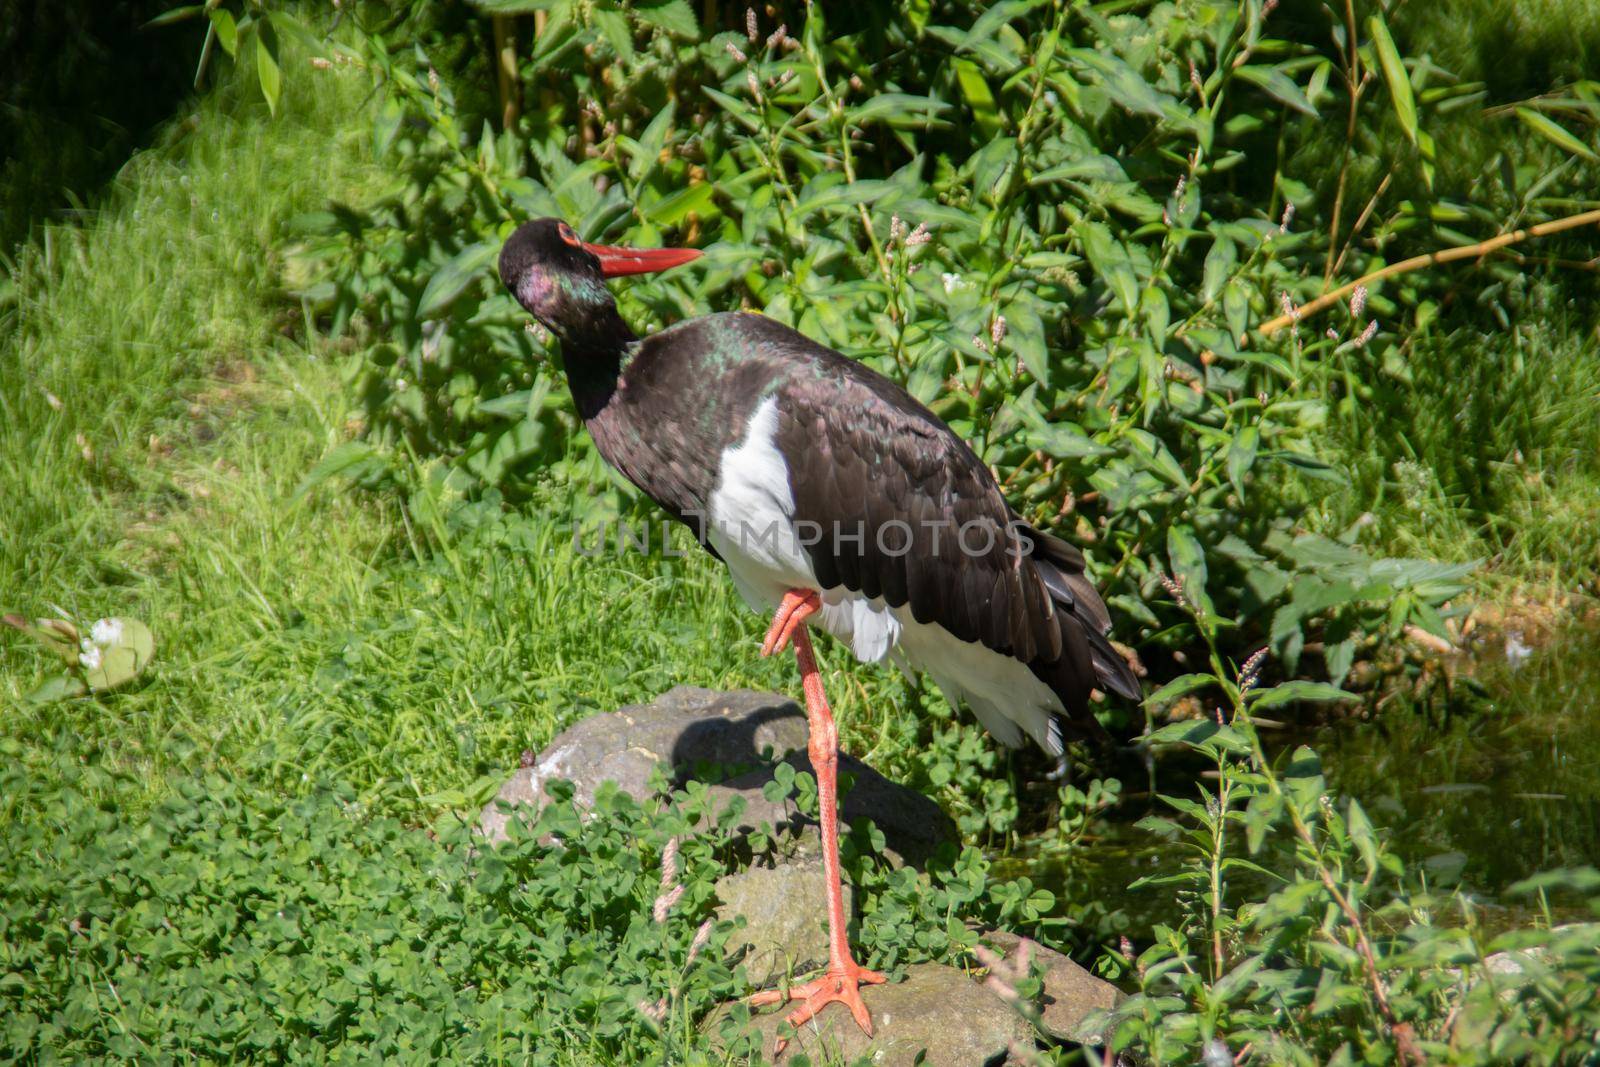 Black stork with a long red beak is standing in the meadow